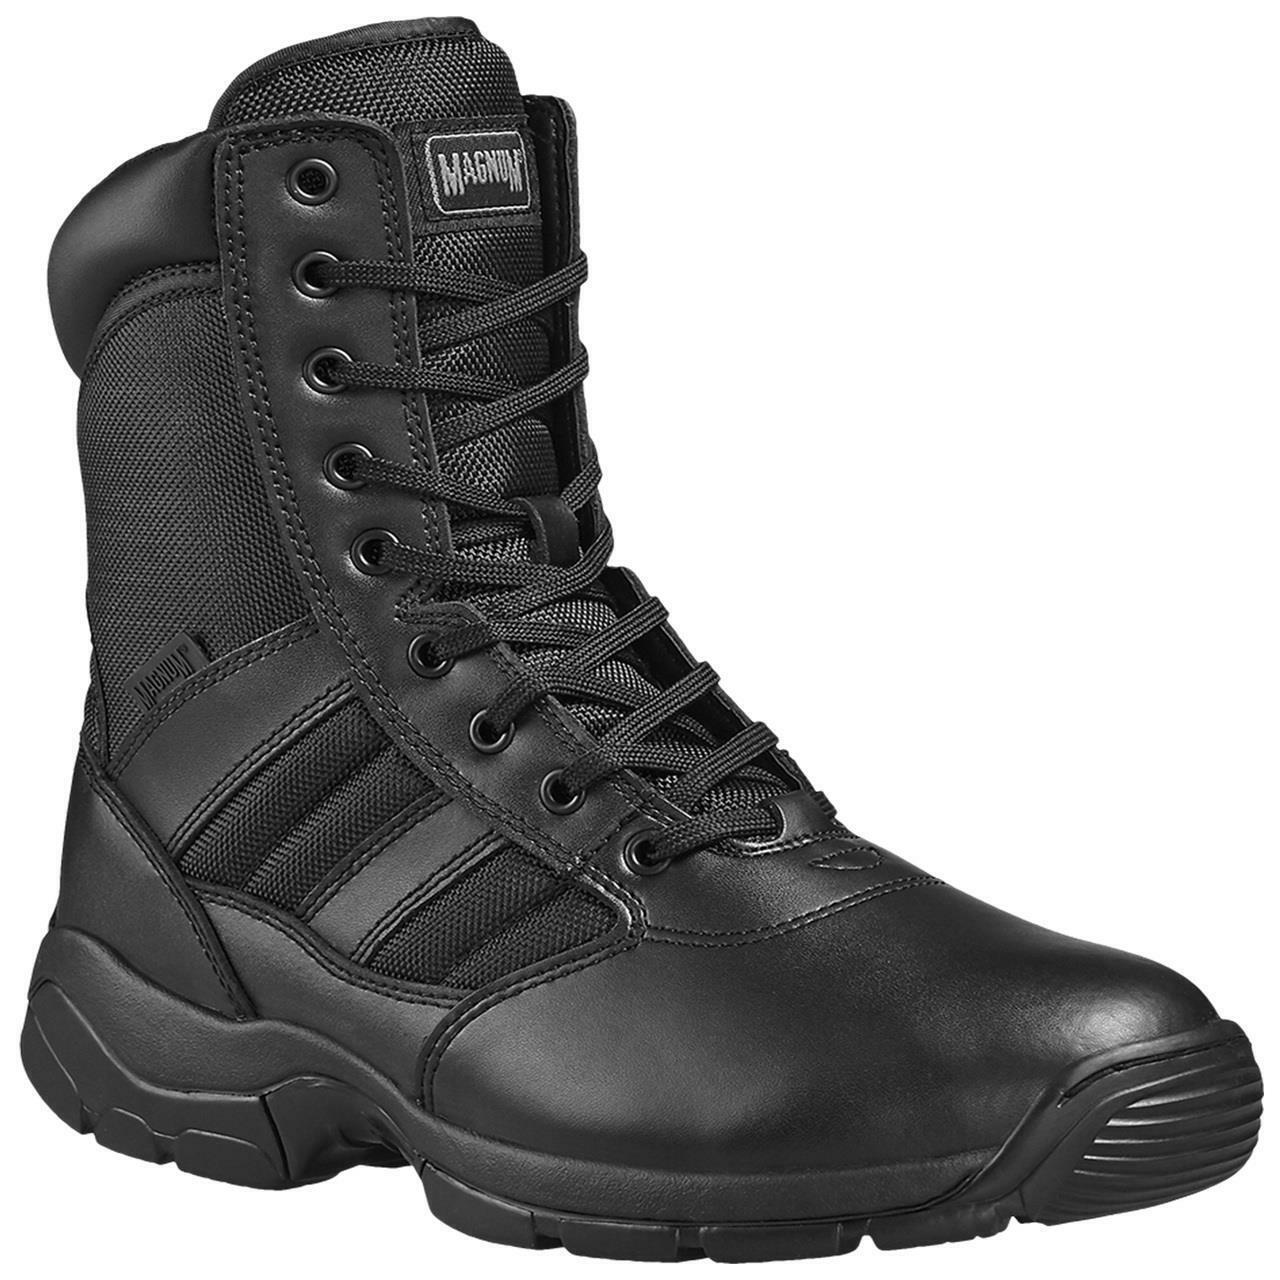 Magnum Panther black 8" combat cadet security non-safety boot #M800298